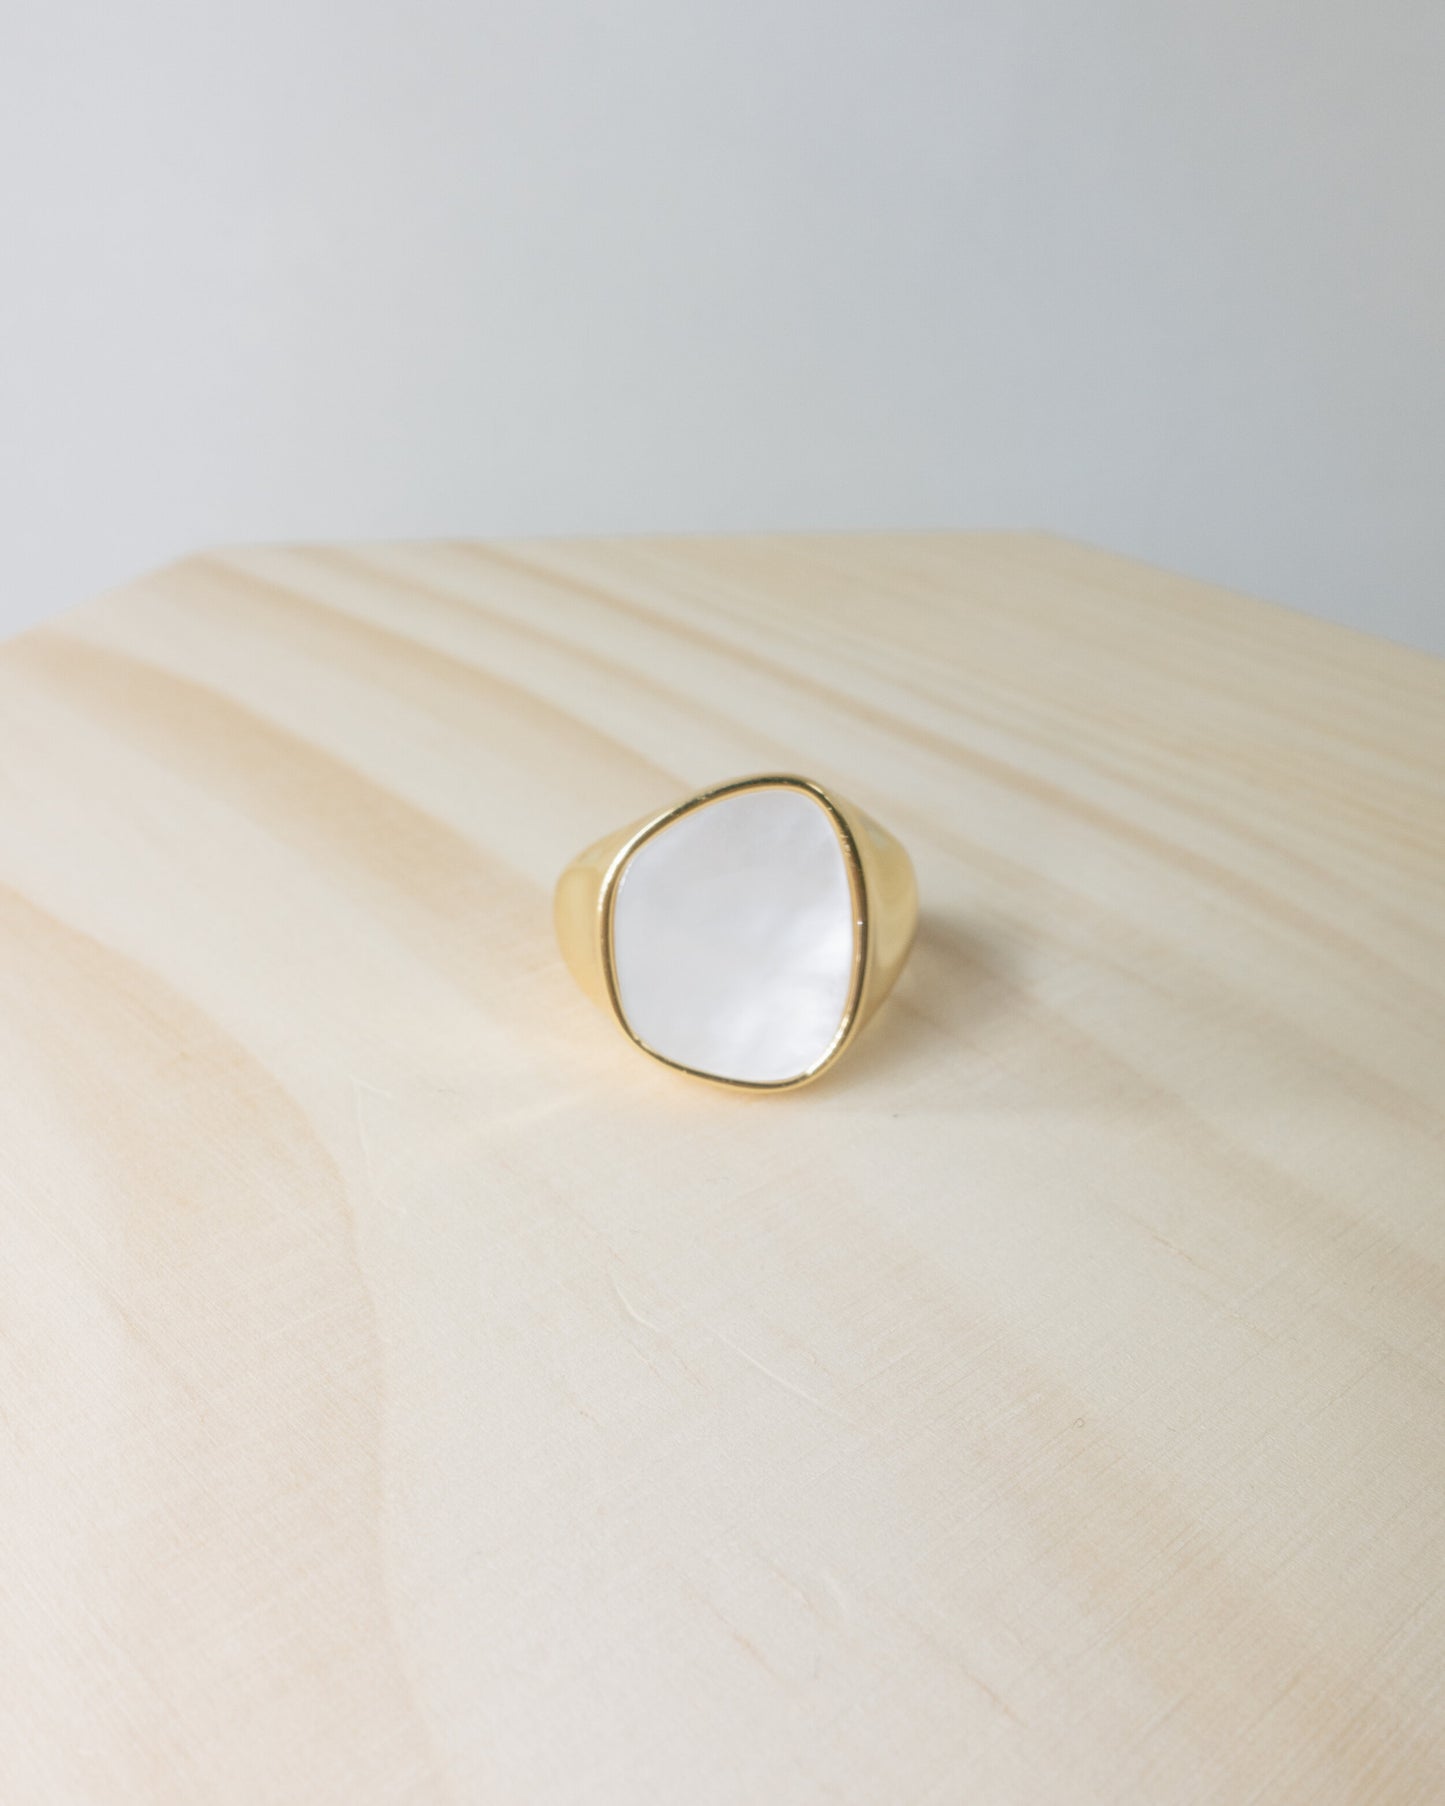 "Royal" mother of pearl statement ring